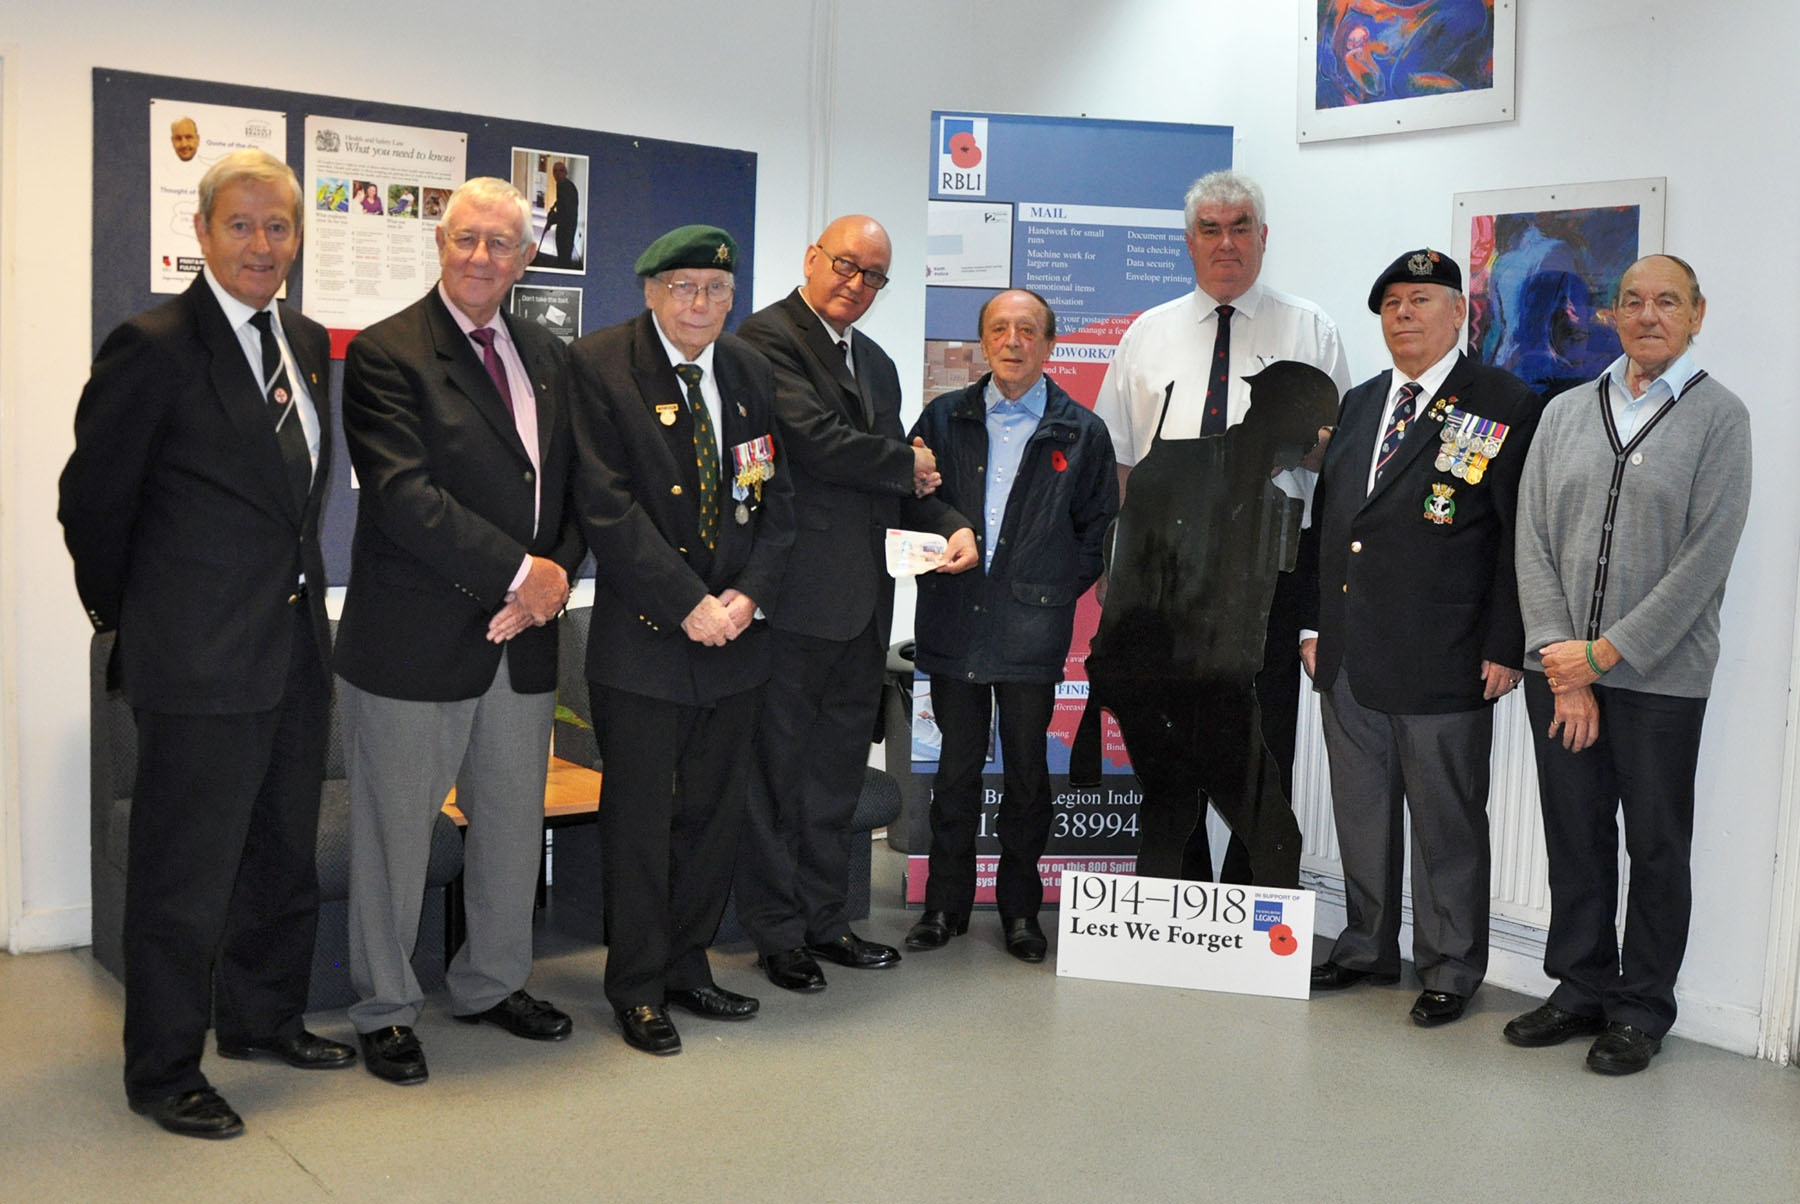 A visit to the Royal British Legion in Surrey